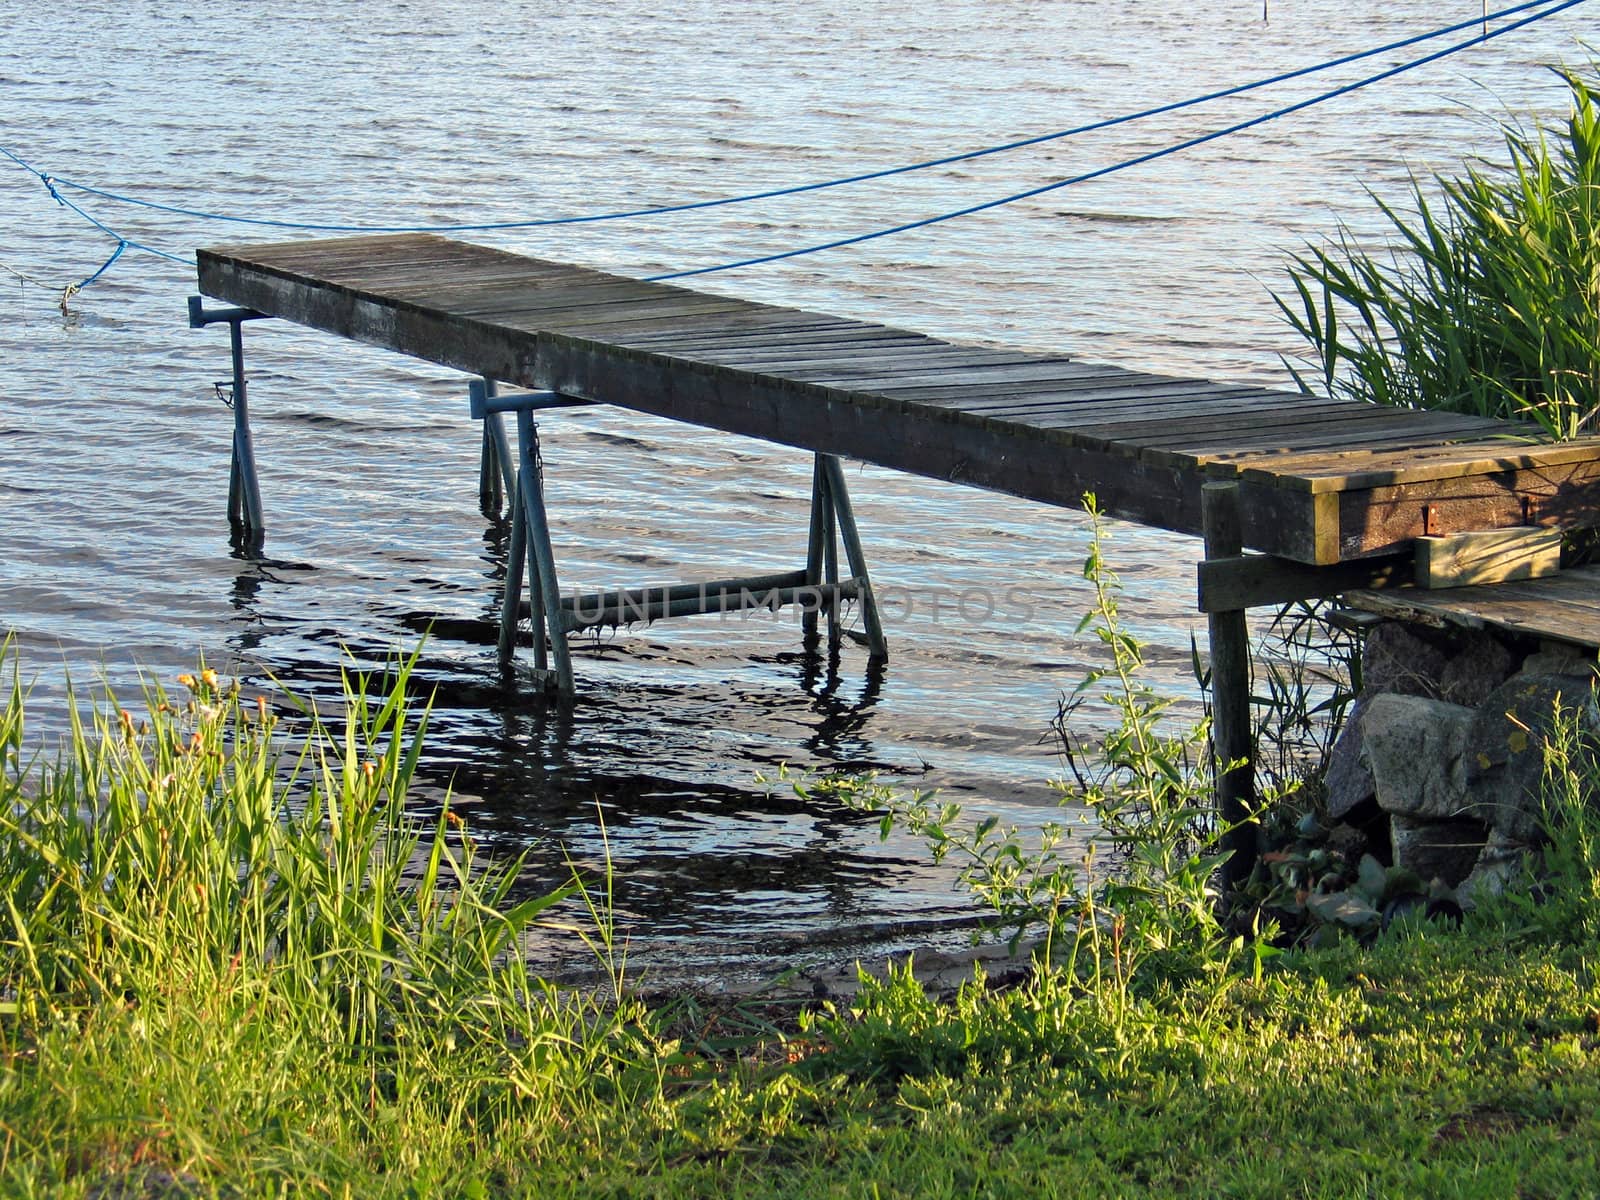 Small homemade wooden jetty dock in front of the water